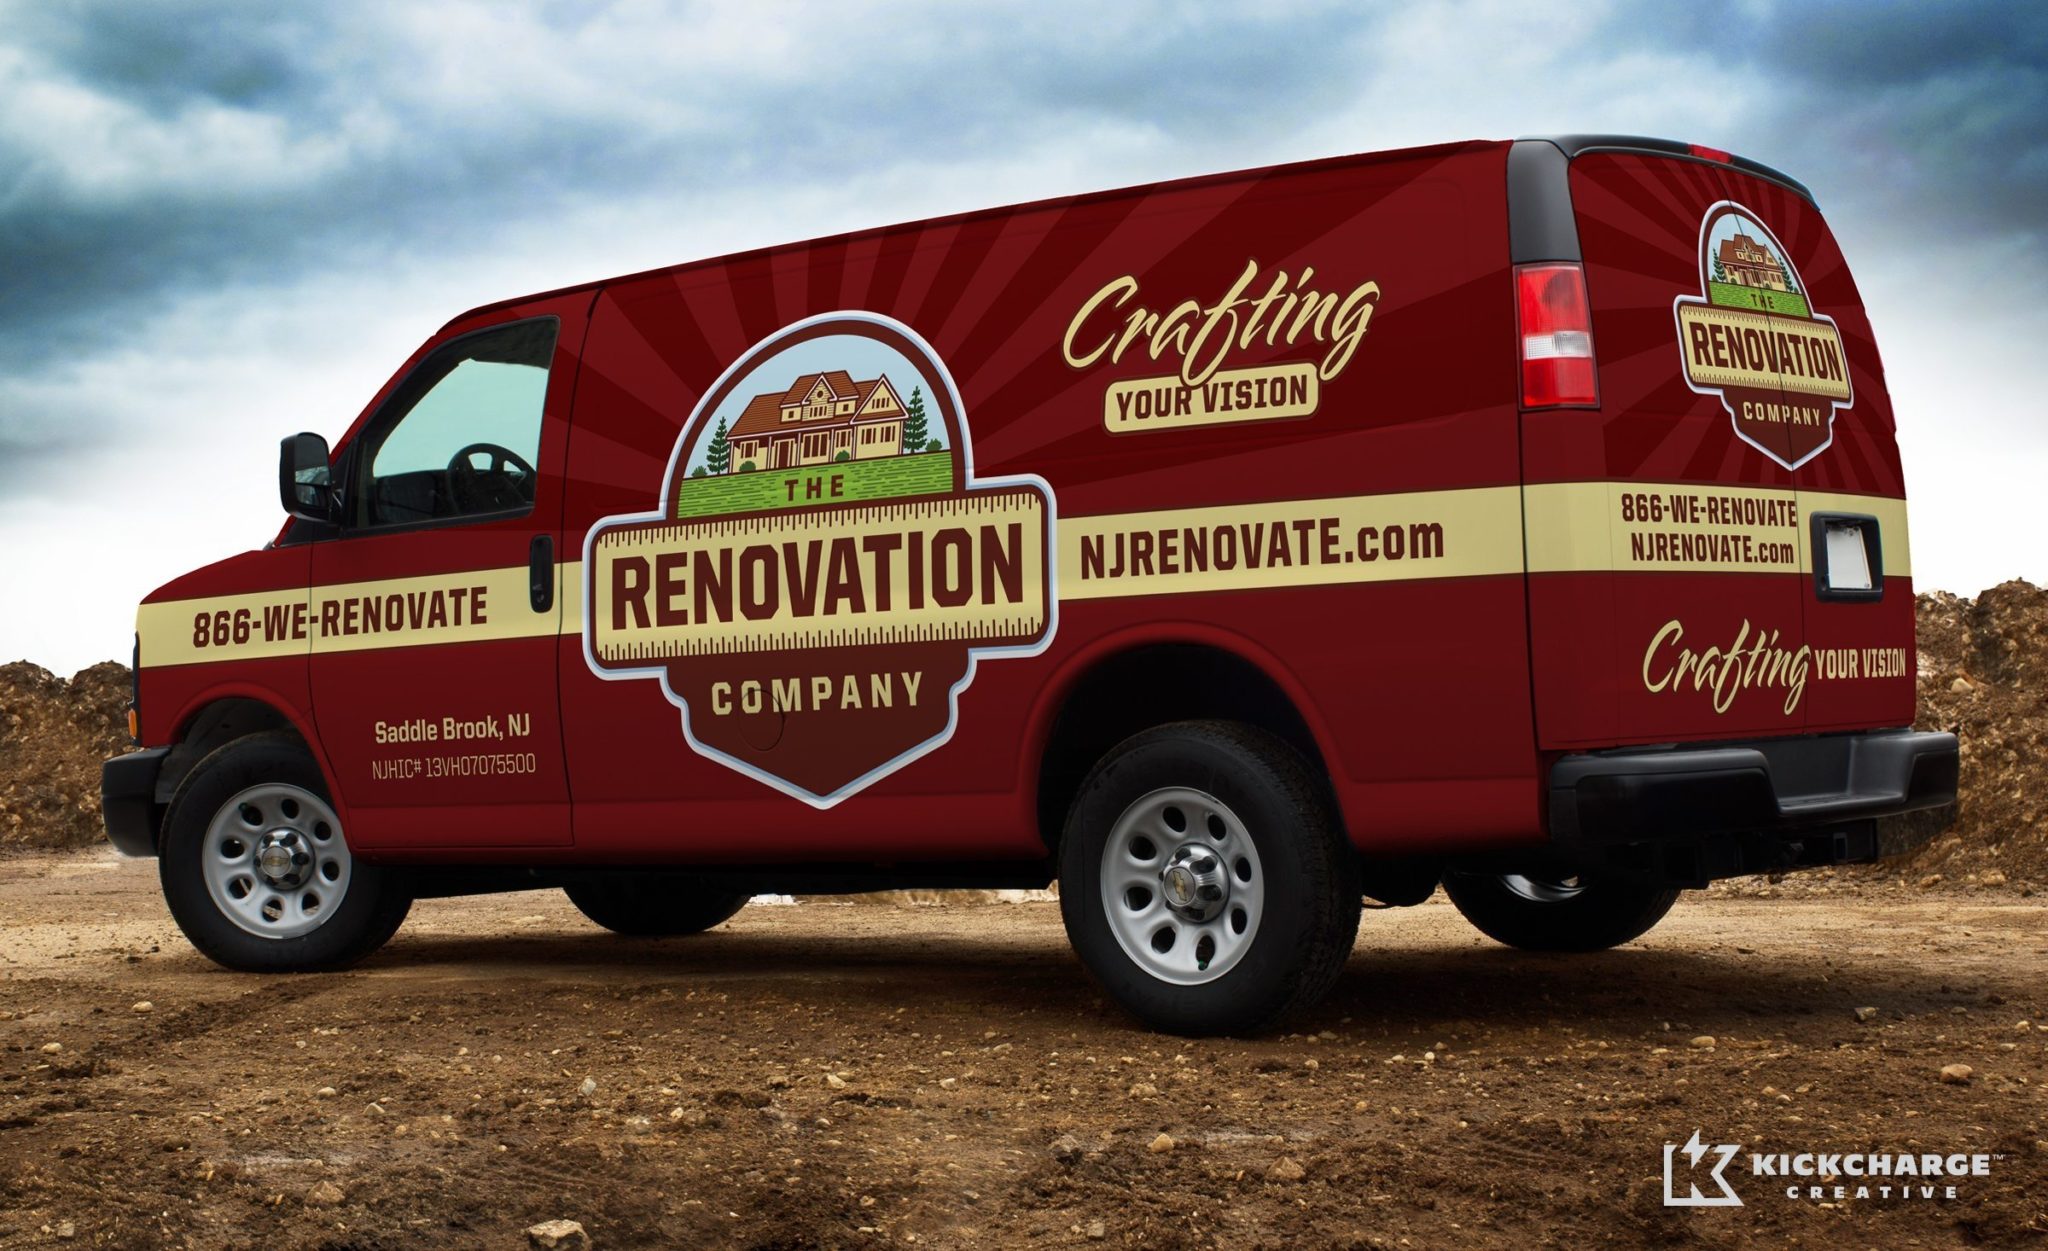 Vehicle wrap design for a home remodeling company in Saddle Brook, NJ.